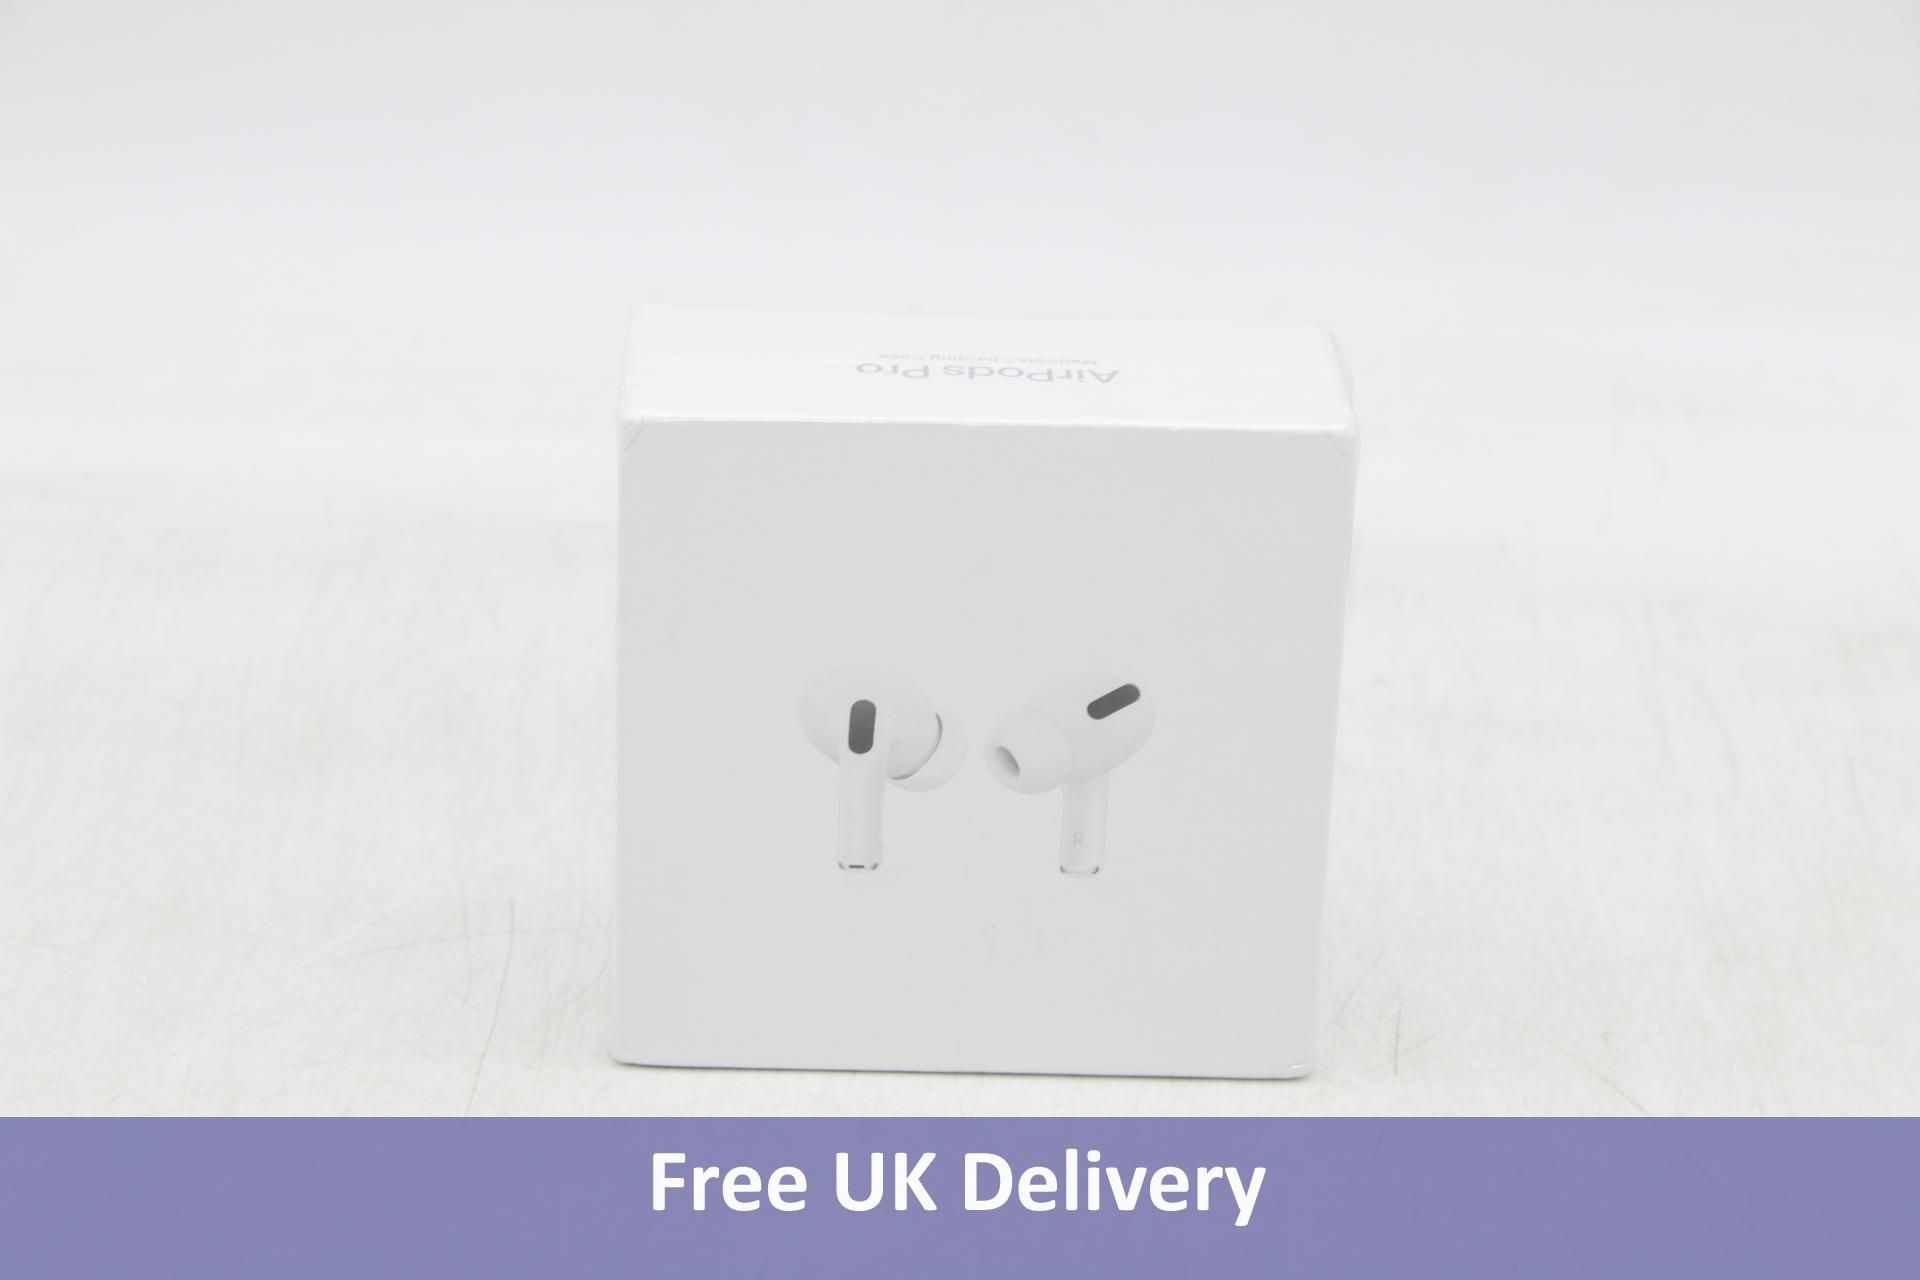 Airpods Pro with Magsafe Charging Case, White